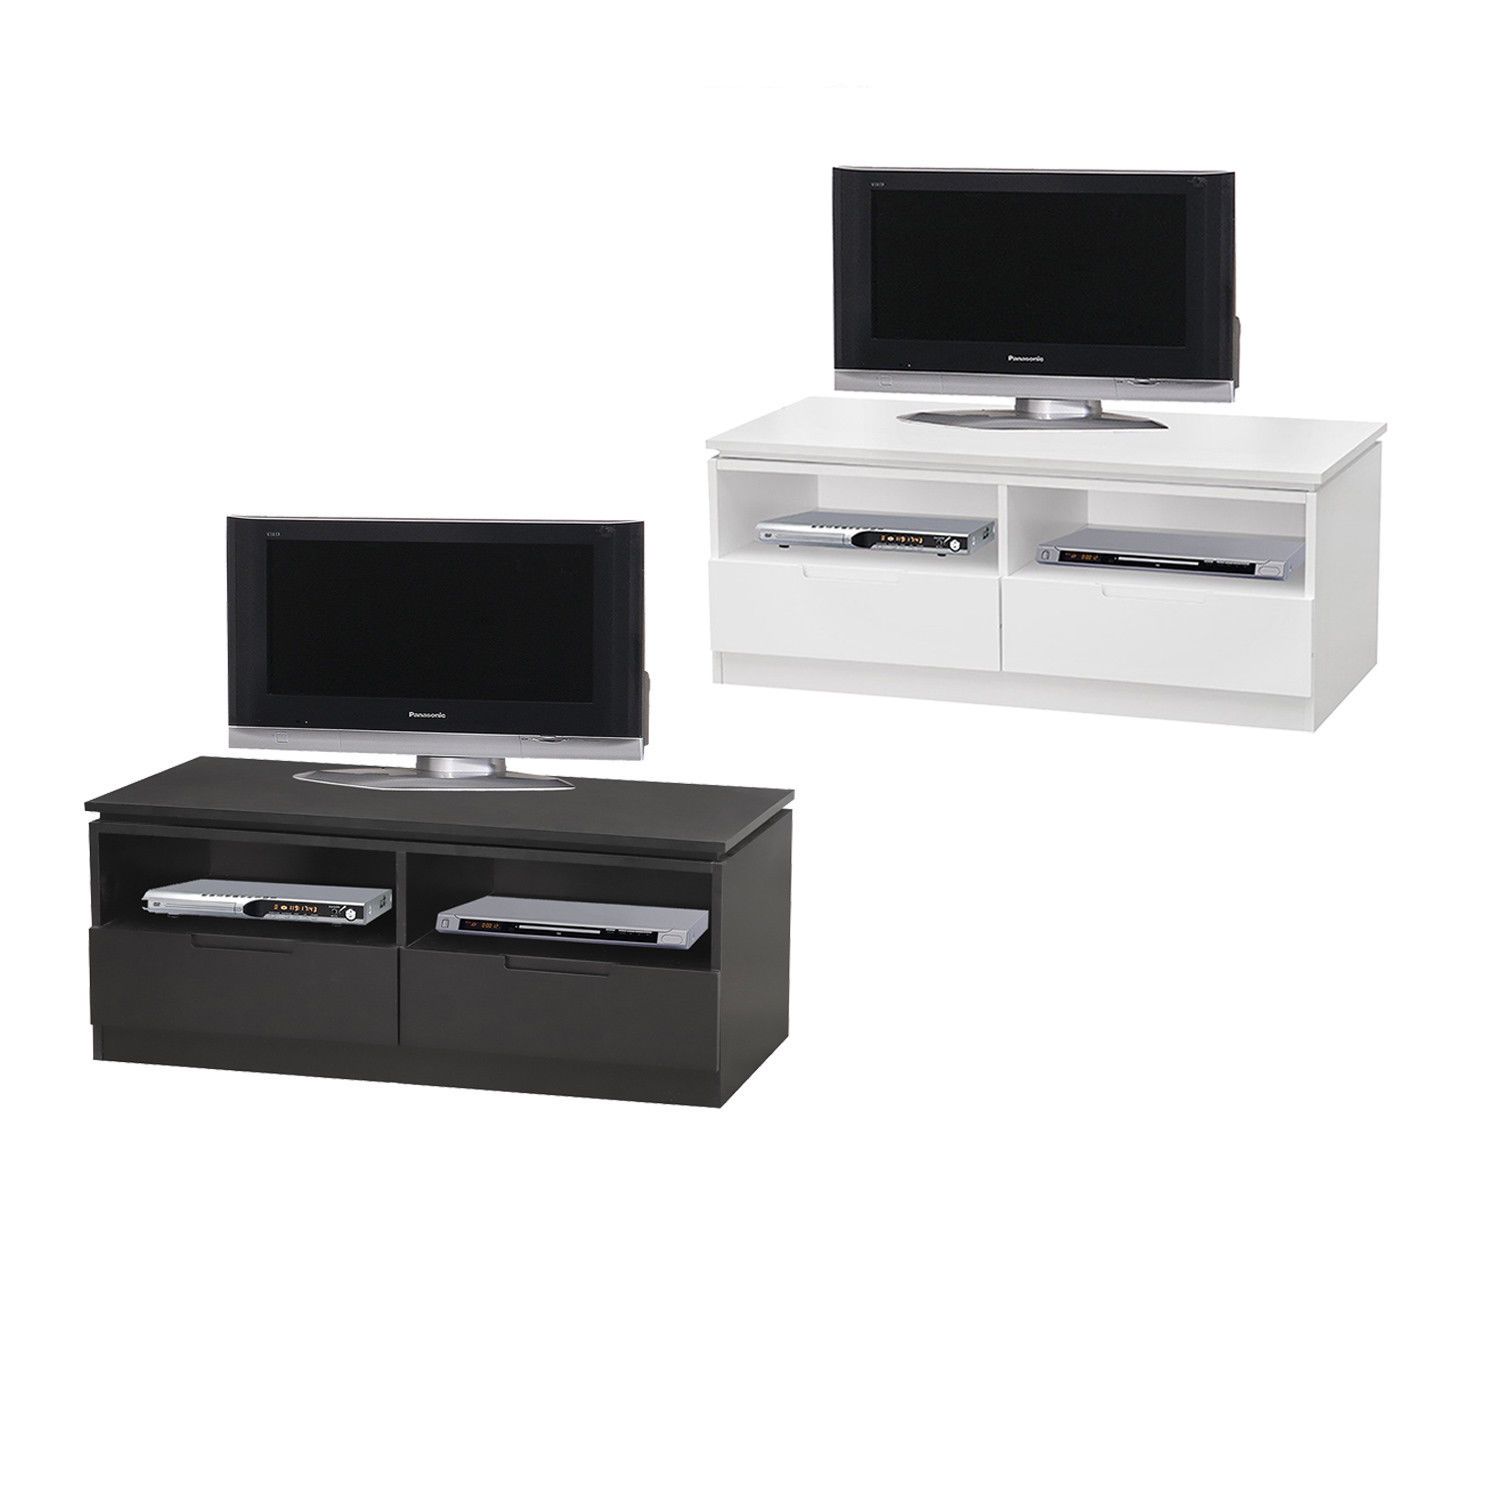 Orb Tv Cabinet With 2 Drawers And Shelves – 100cm Wide Intended For Black Tv Stands With Drawers (View 11 of 15)